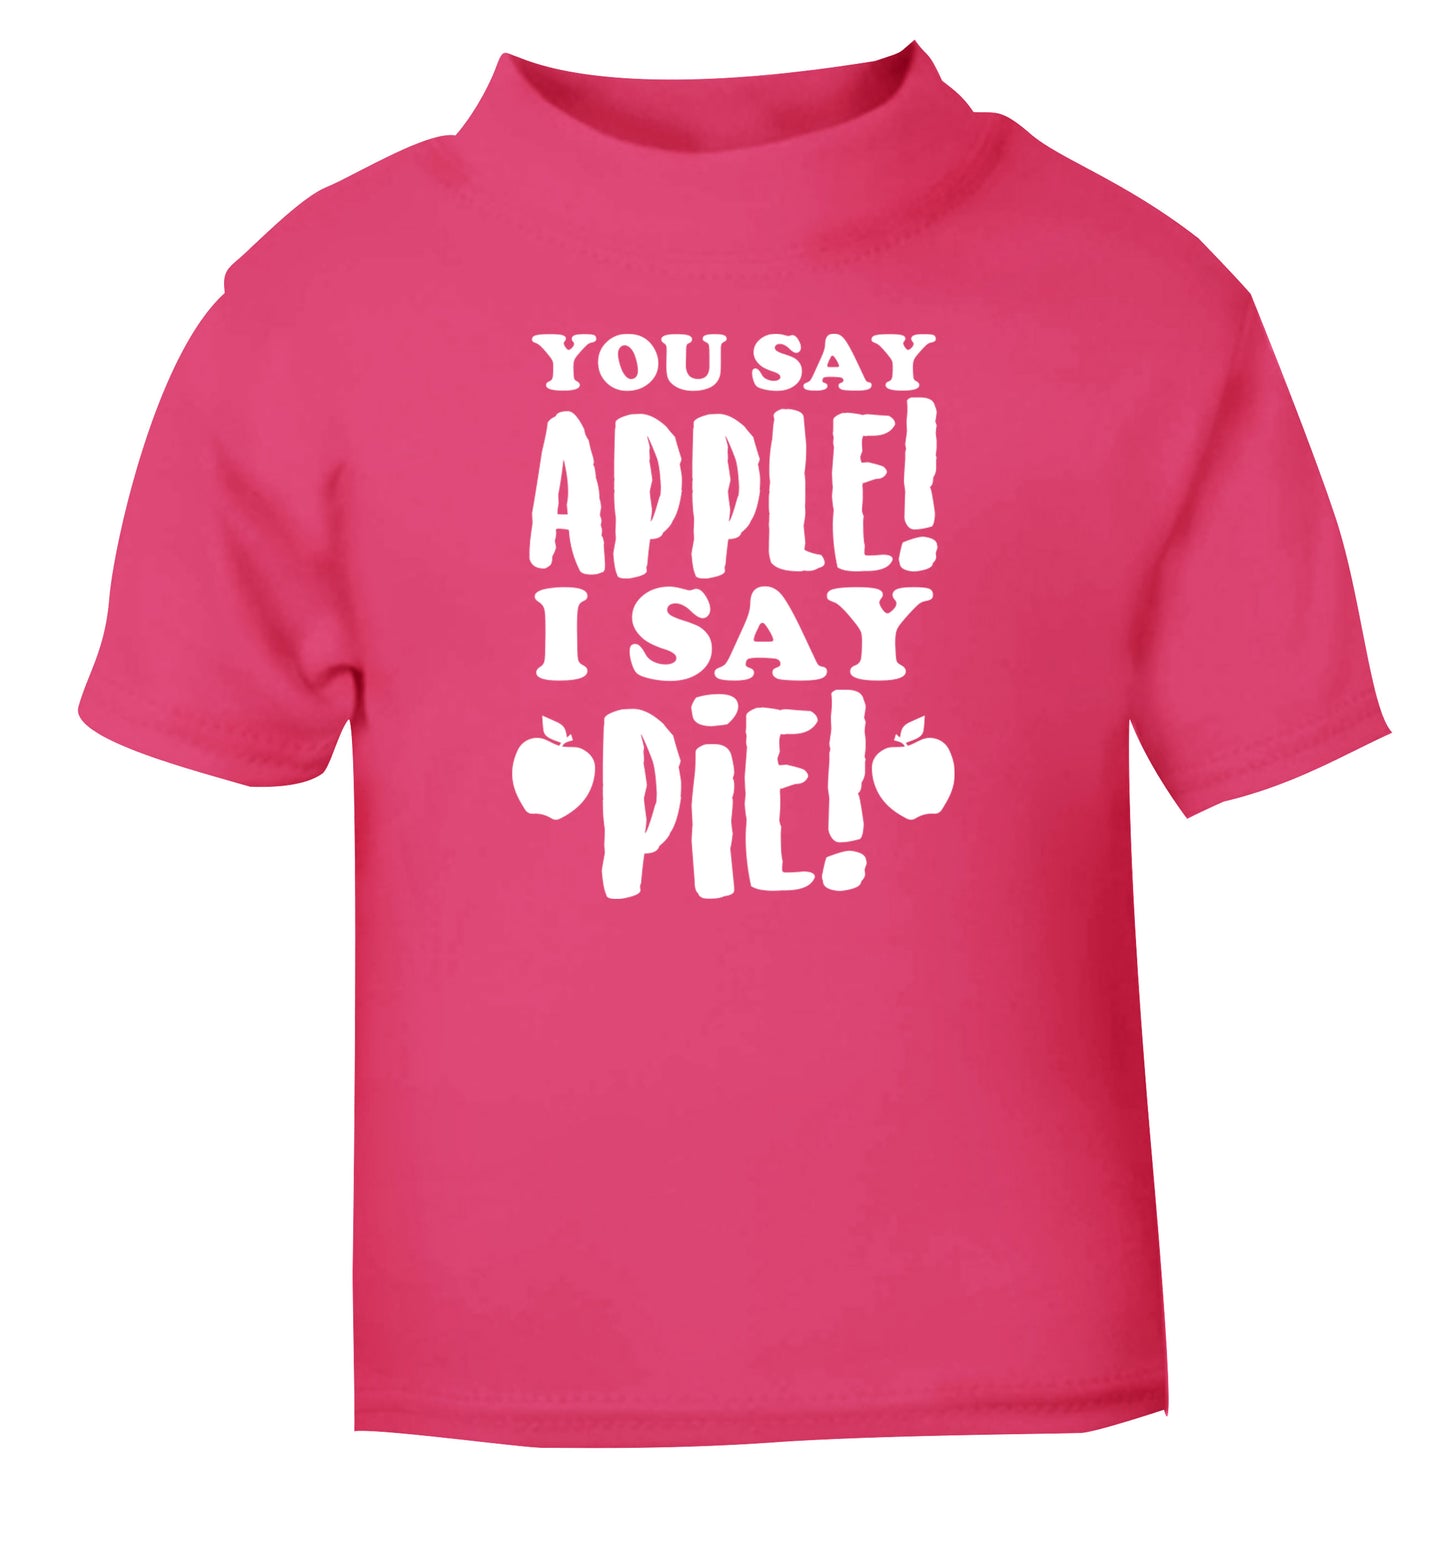 You say apple I say pie! pink Baby Toddler Tshirt 2 Years